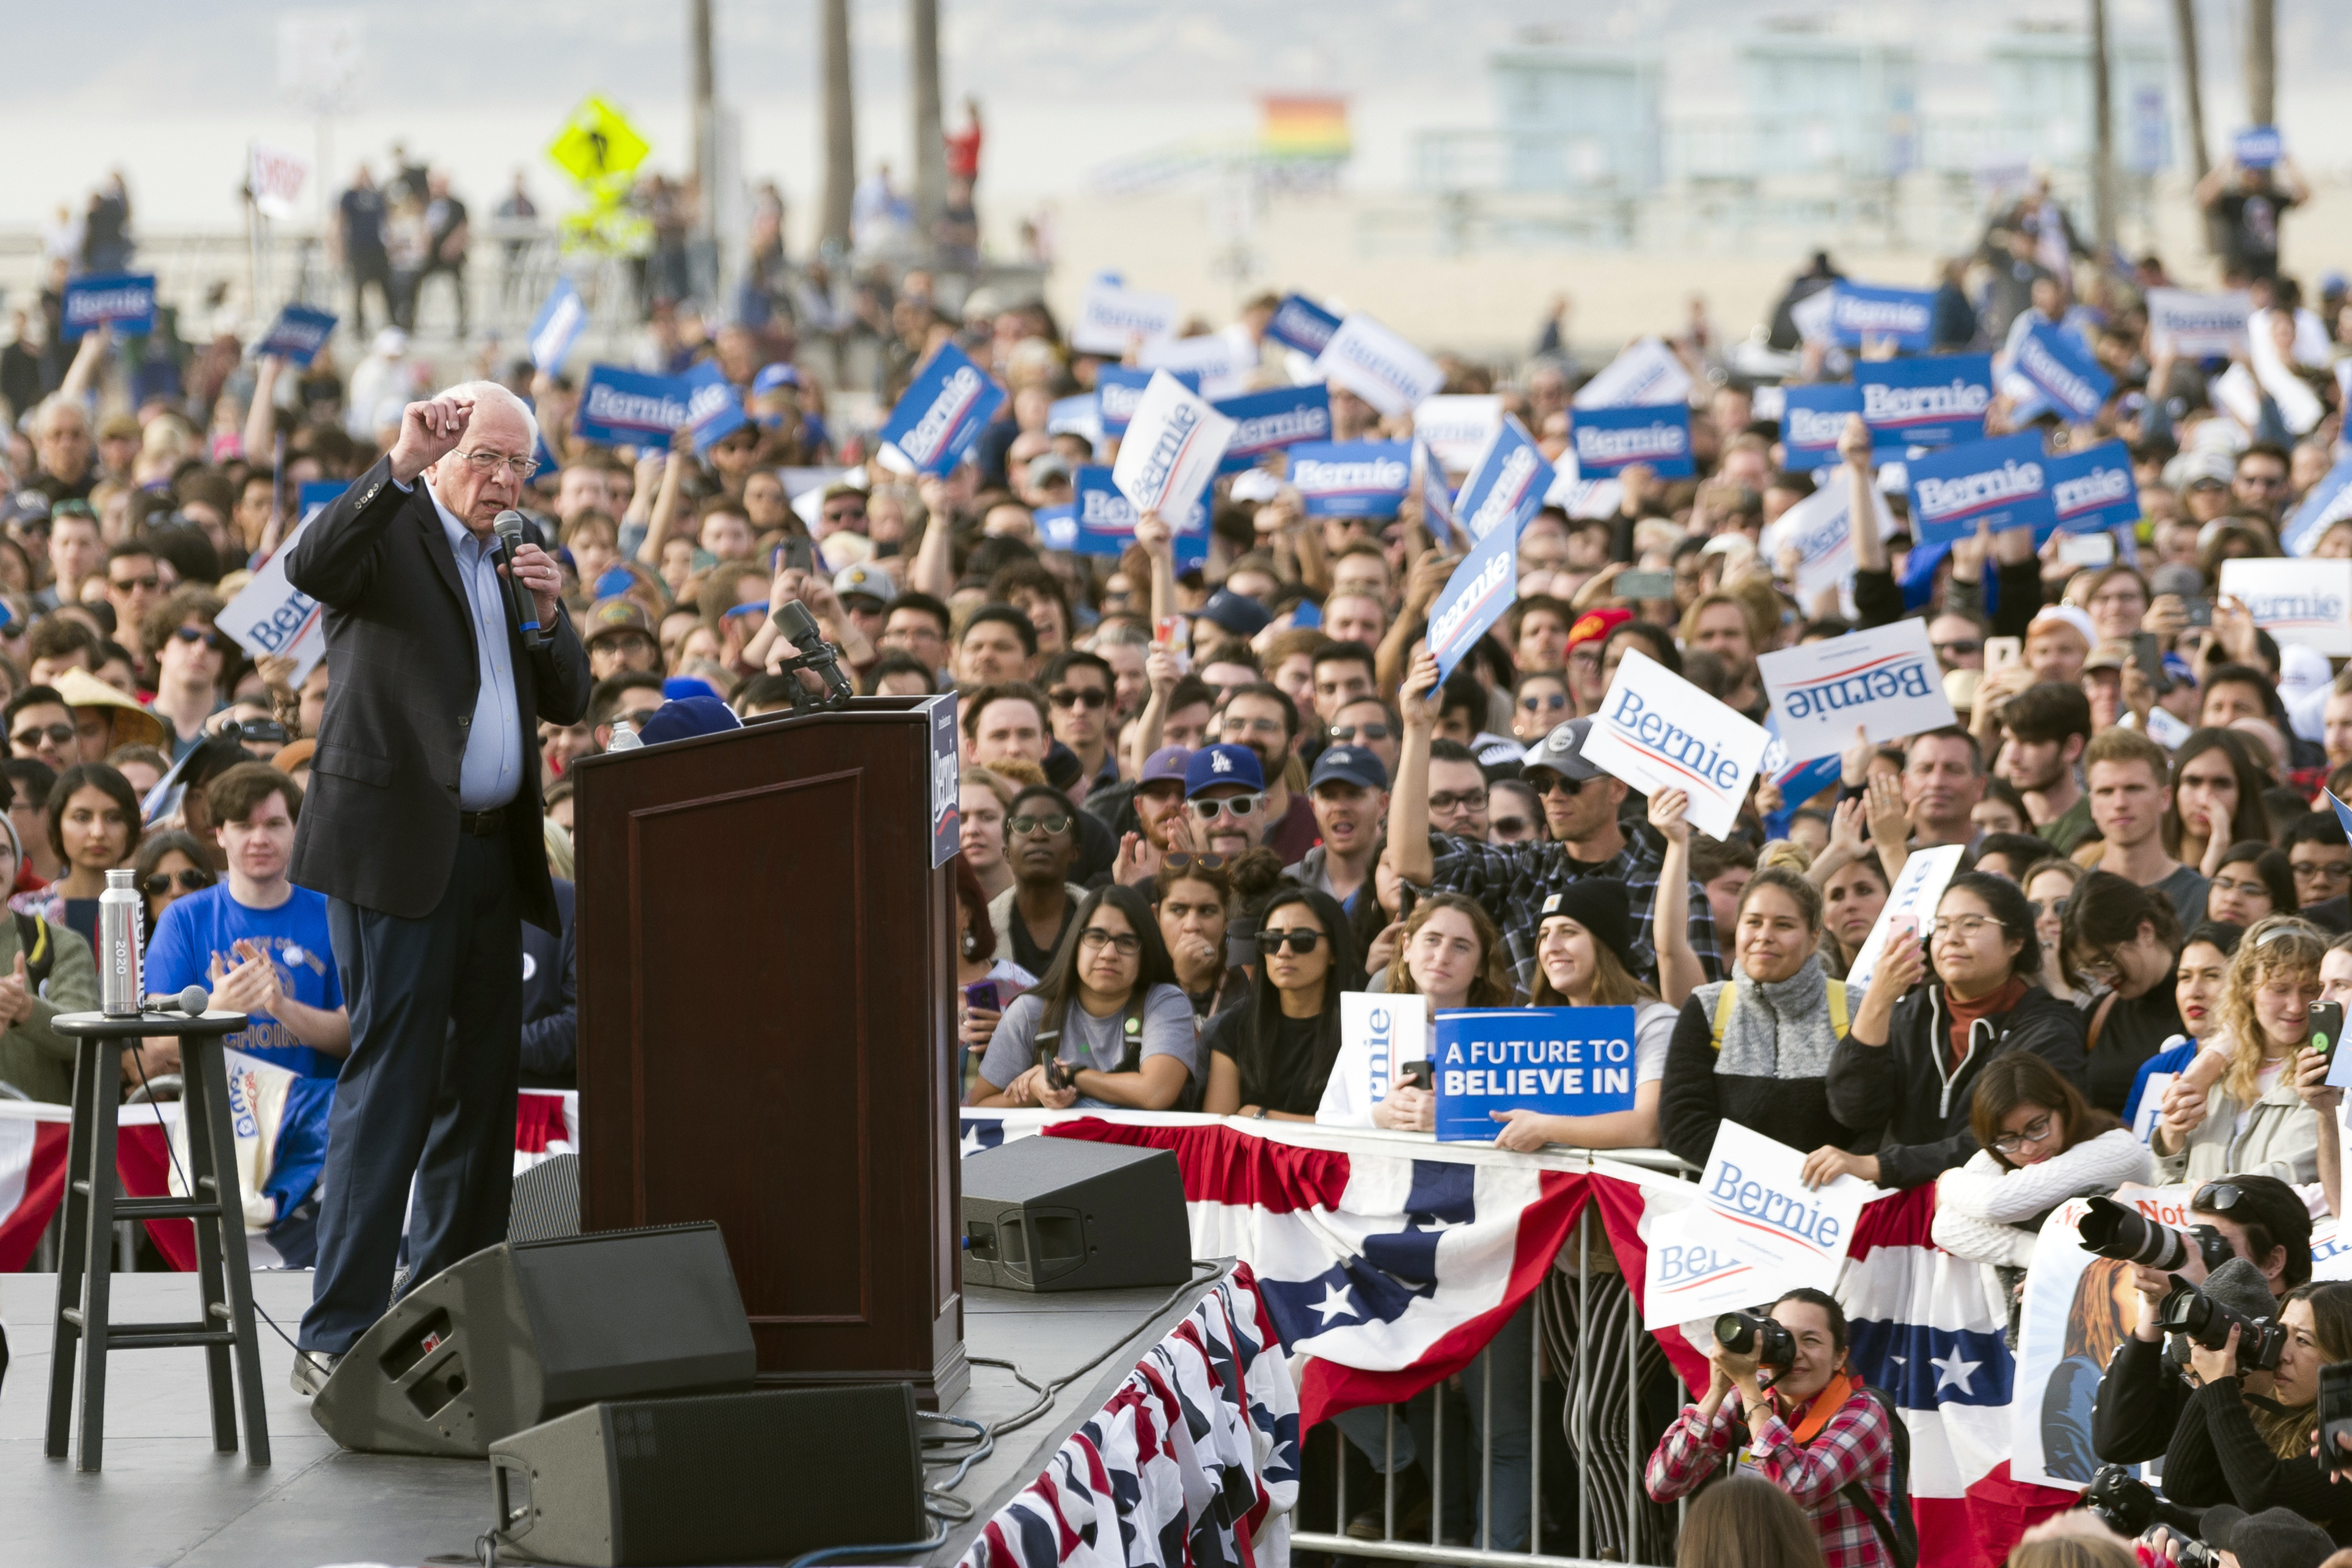 FILE - In this Dec. 21, 2019, file photo, Democratic presidential candidate Sen. Bernie Sanders, I-Vt., speaks during a rally in Venice, Calif. California is the largest prize in the calculations of any Democratic presidential candidate, but it rarely seems that way.  (AP Photo/Kelvin Kuo, File)